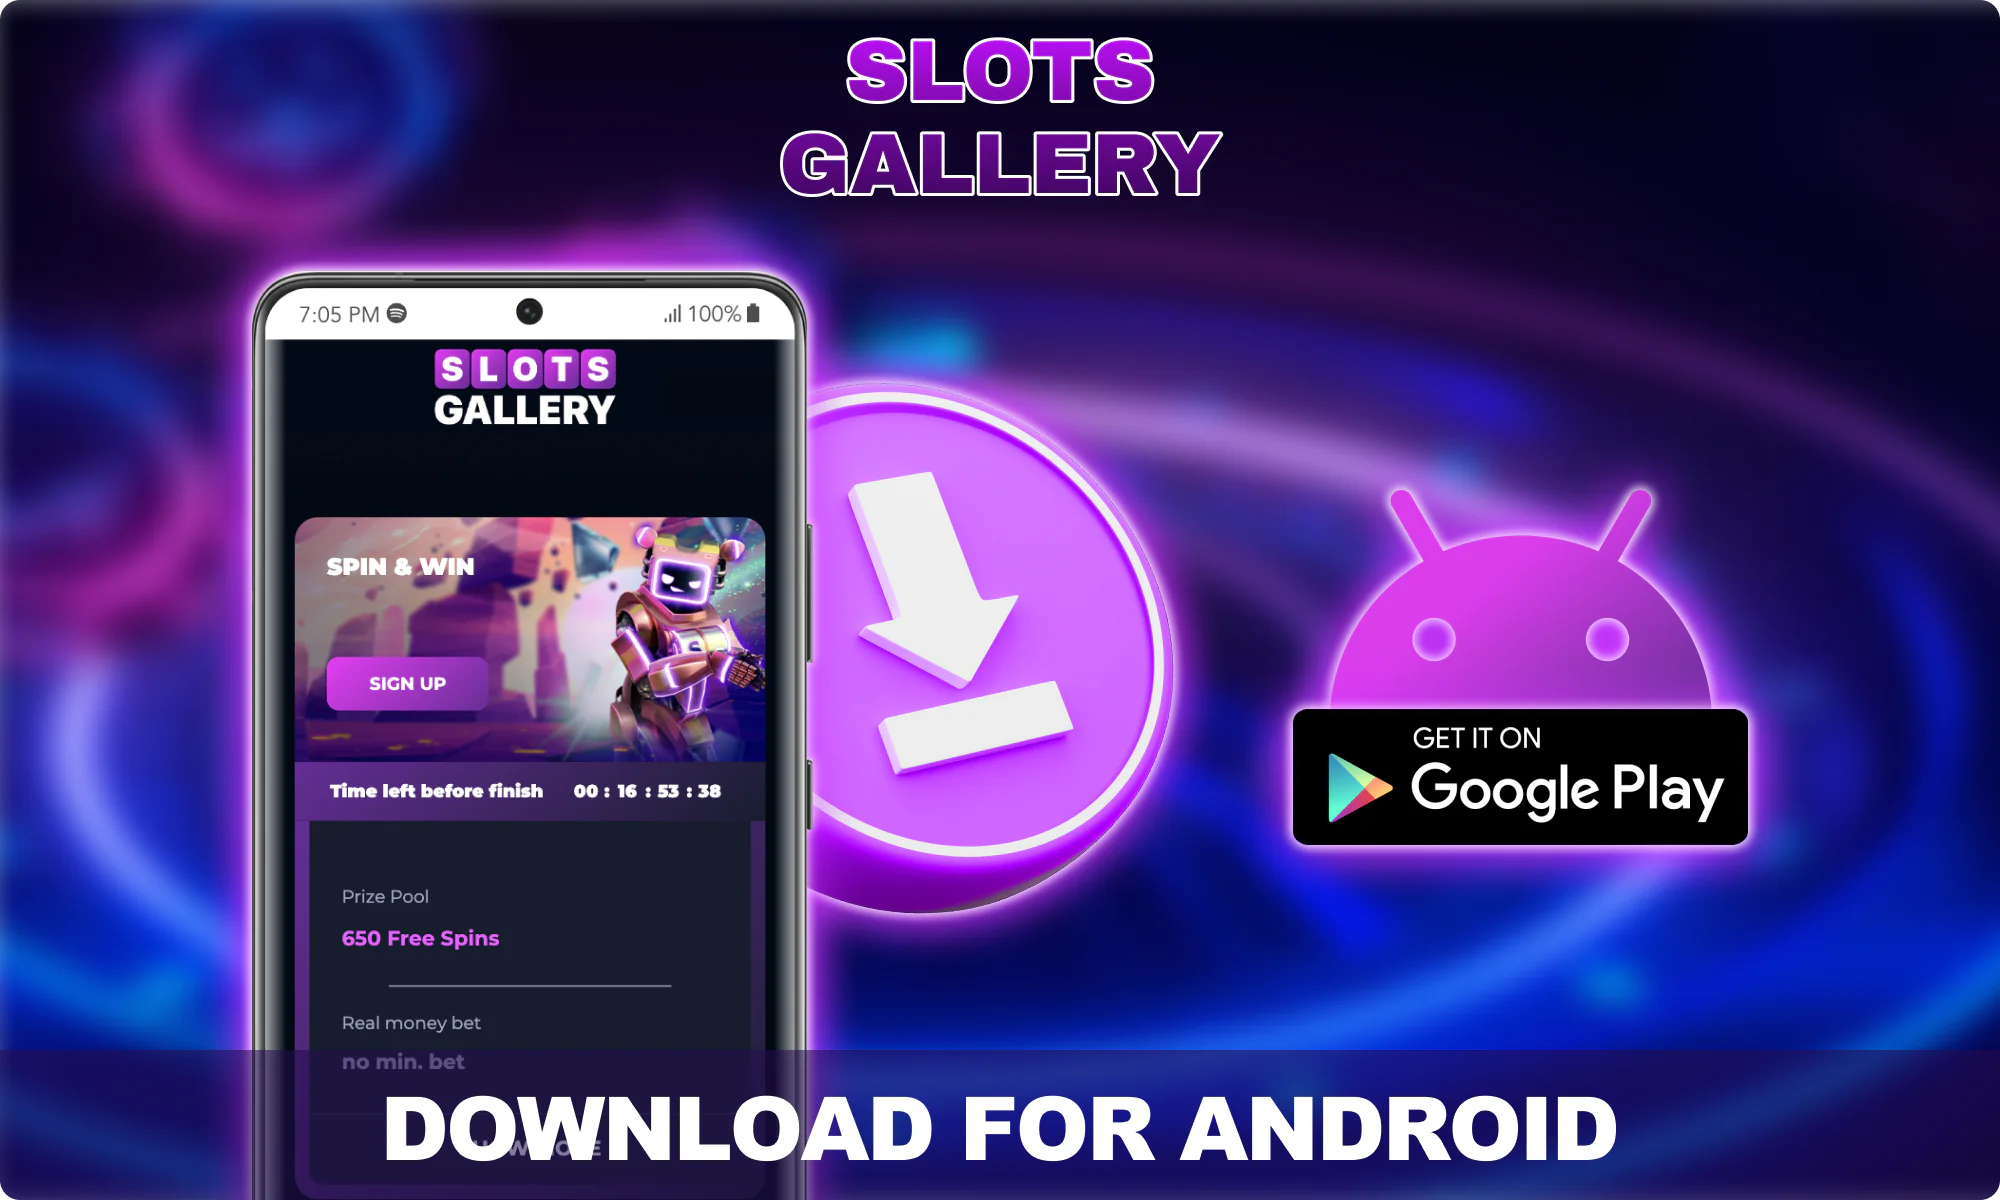 Download the Slots Gallery Android App for Australian players